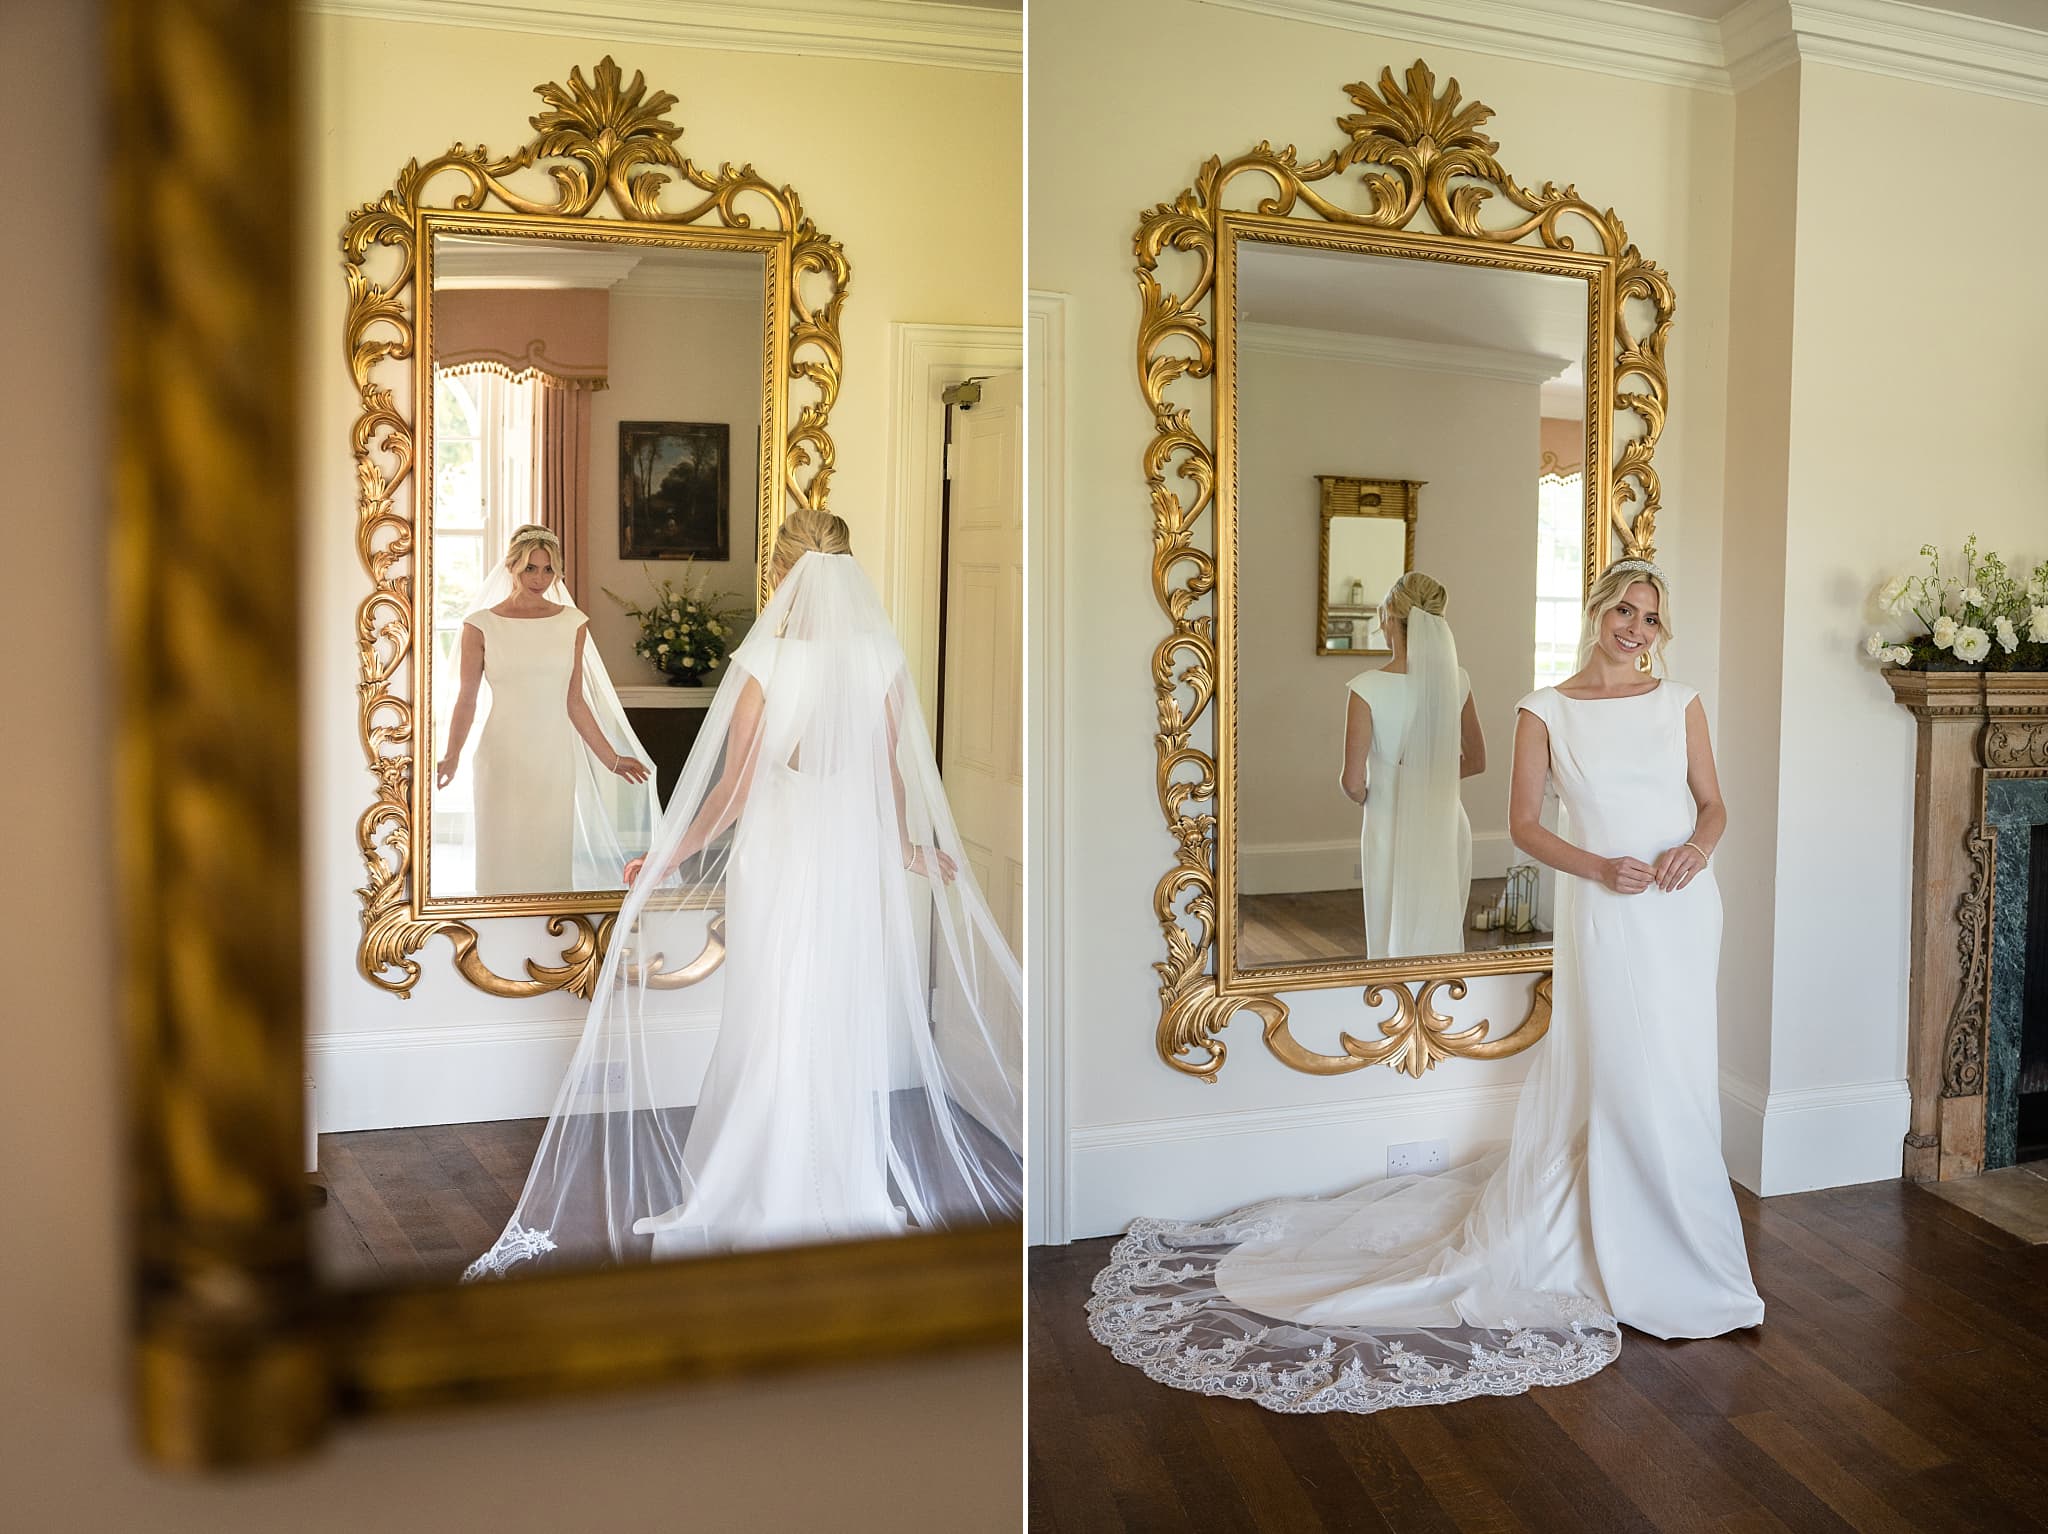 Bride checking her outfit in a full length ornate gold framed mirror at Sutton Bonington Hall